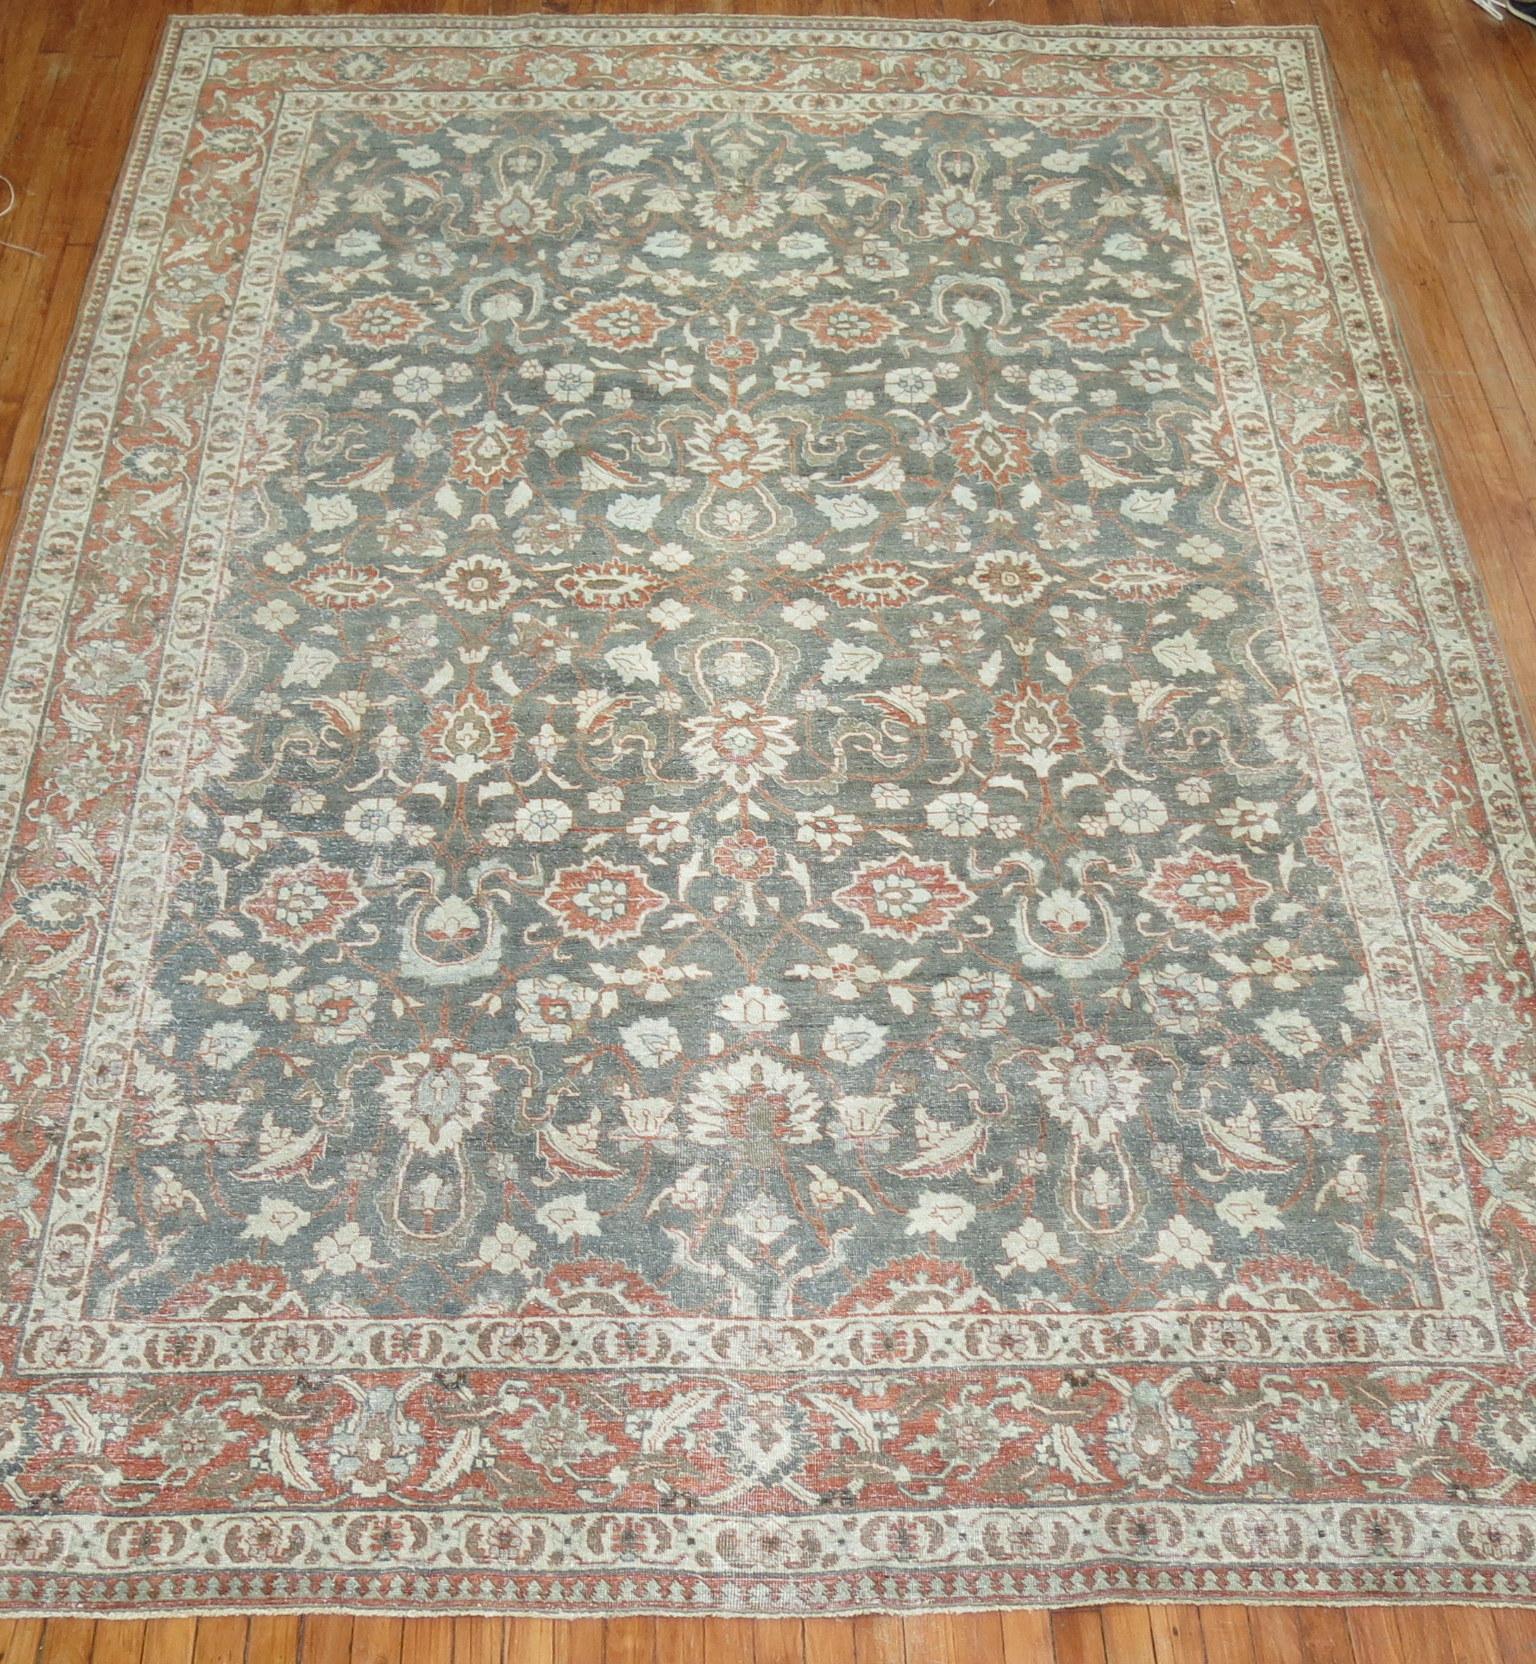 An early 20th century Persian Tabriz room size rug in green and orange

Measures: 8' x 11'6''.

 